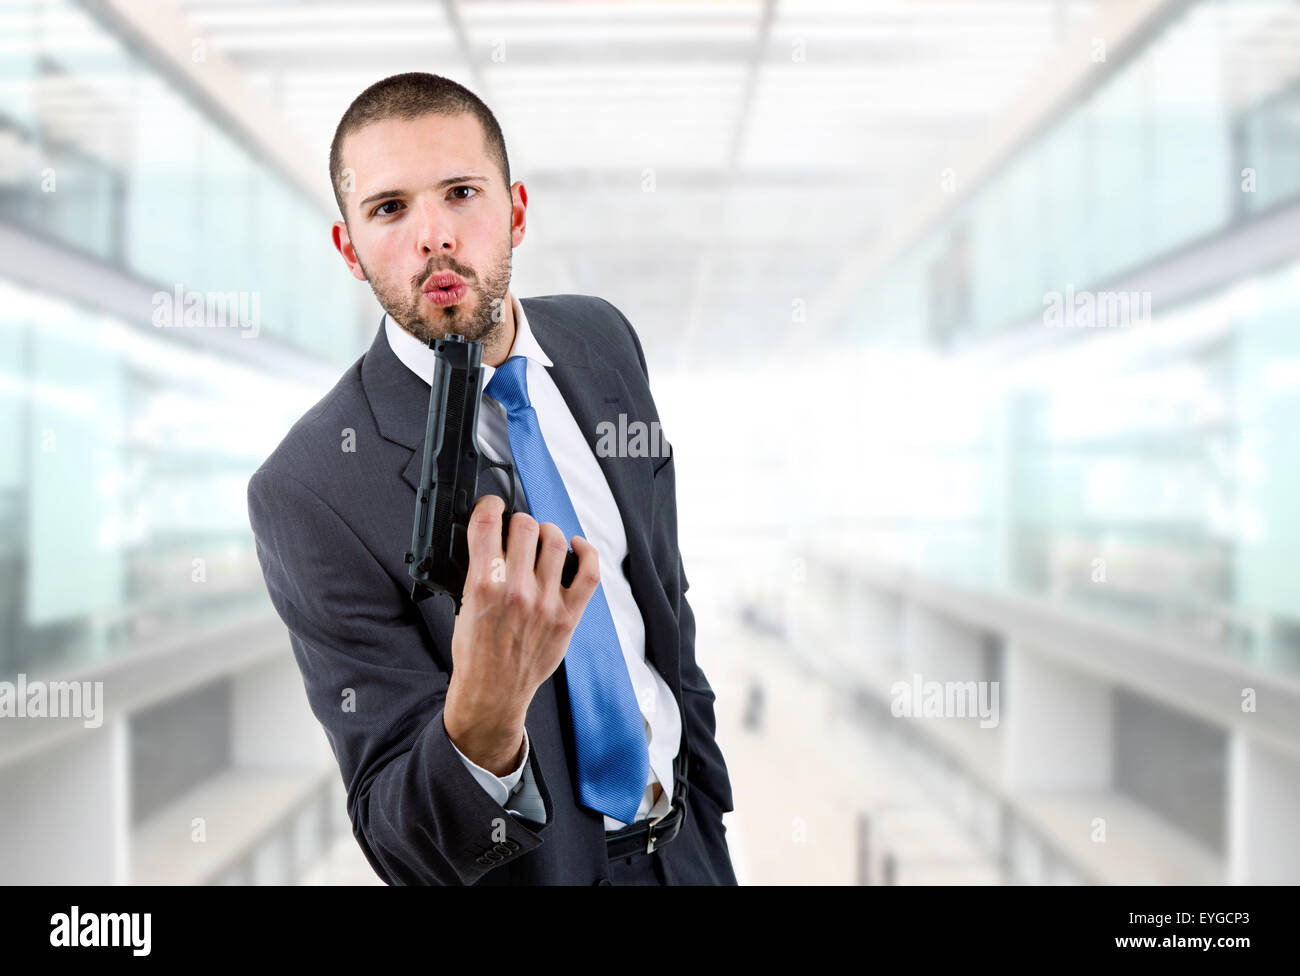 young businessman with a gun, at the office Stock Photo